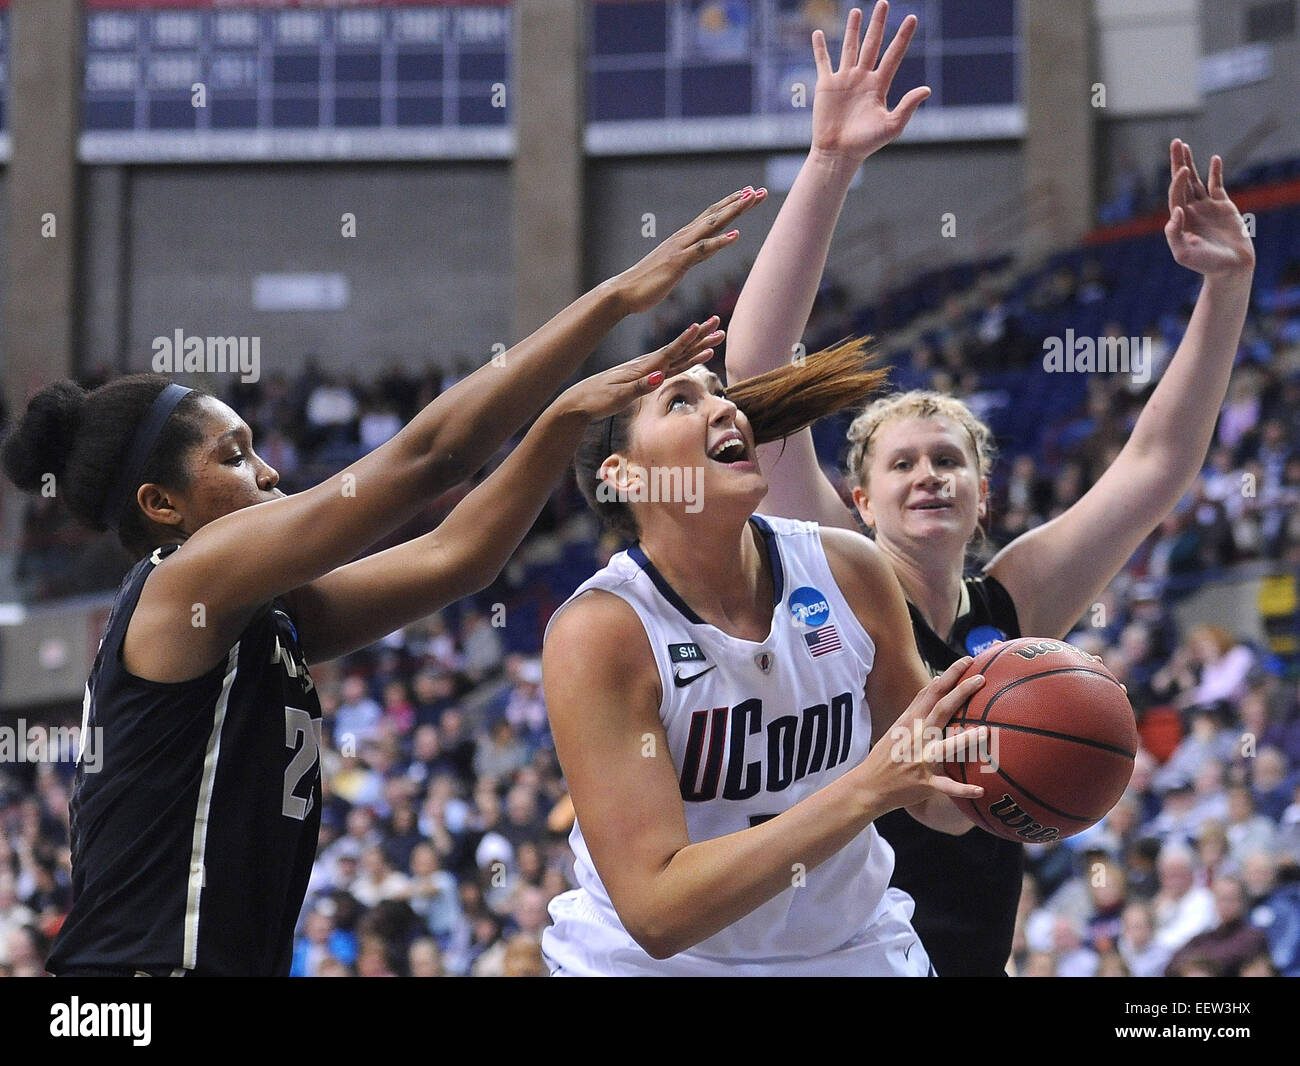 Storrs CT USA-- NCAA Division I Women's Basketball Championship. UCONN's Stefanie Dolson looks for room under the basket as Vanderbilt's Morgan Batey, left, and Kendall Shaw defend during first half. Stock Photo